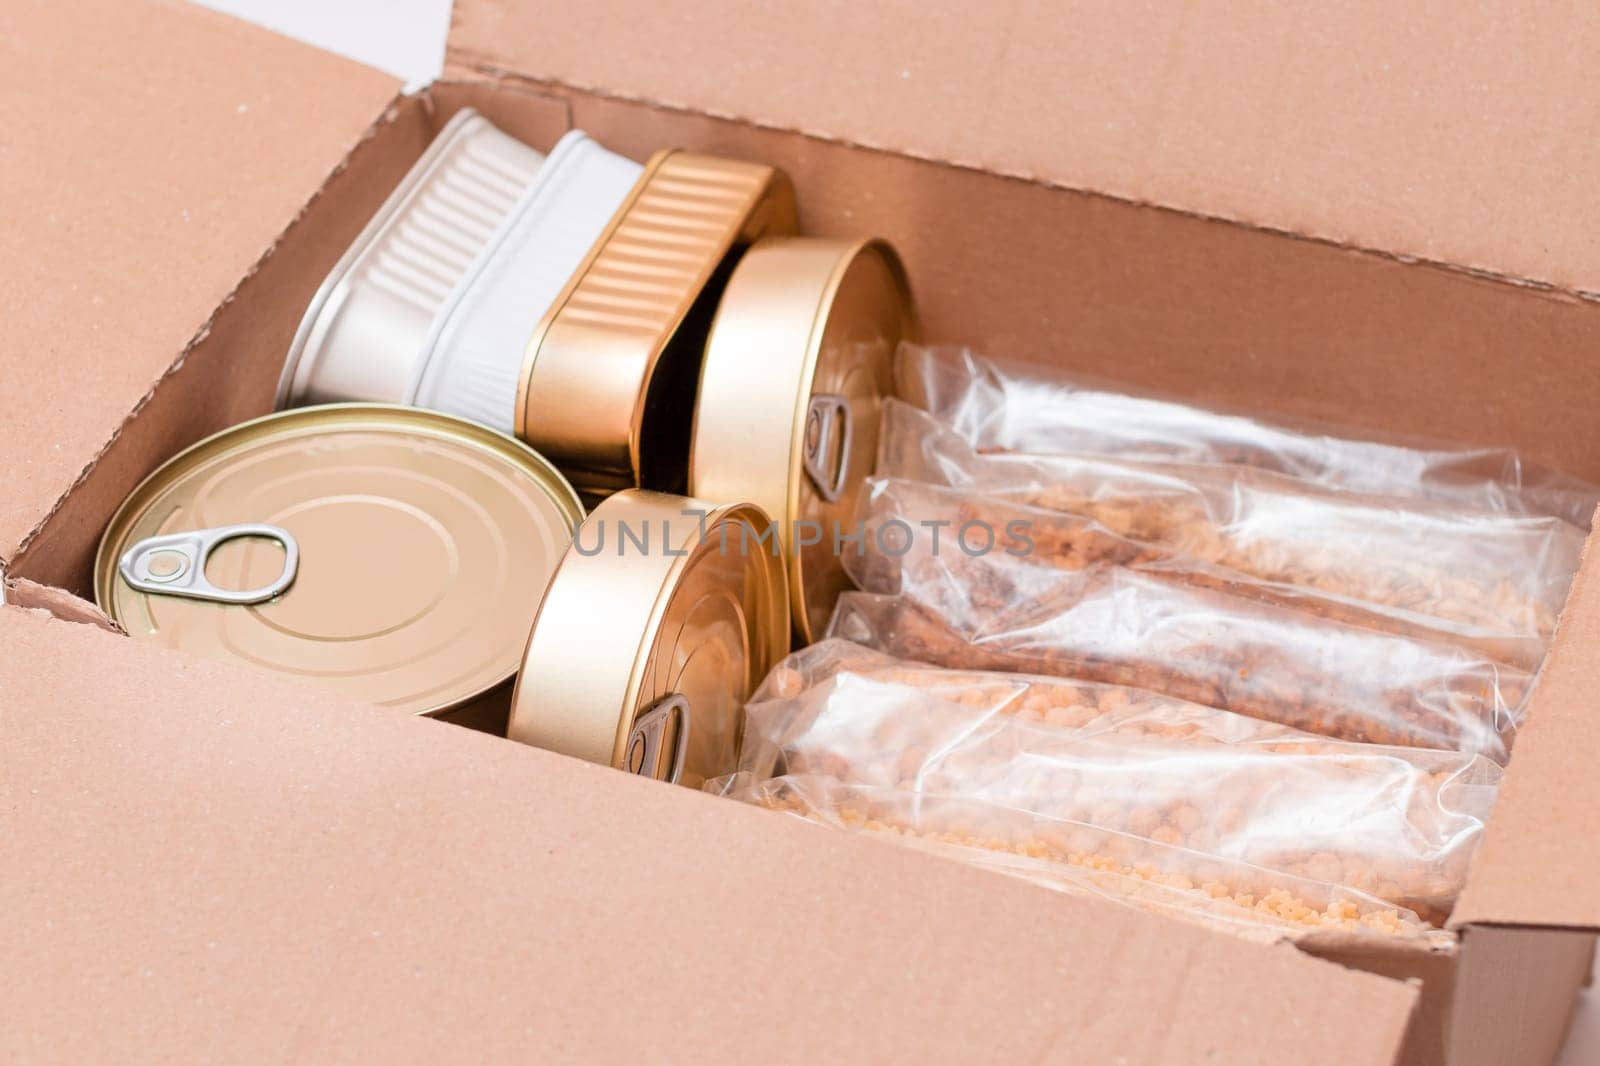 Carton Box with Canned Food, Cereals and Grocery - Donation Box or Food Reserves by InfinitumProdux